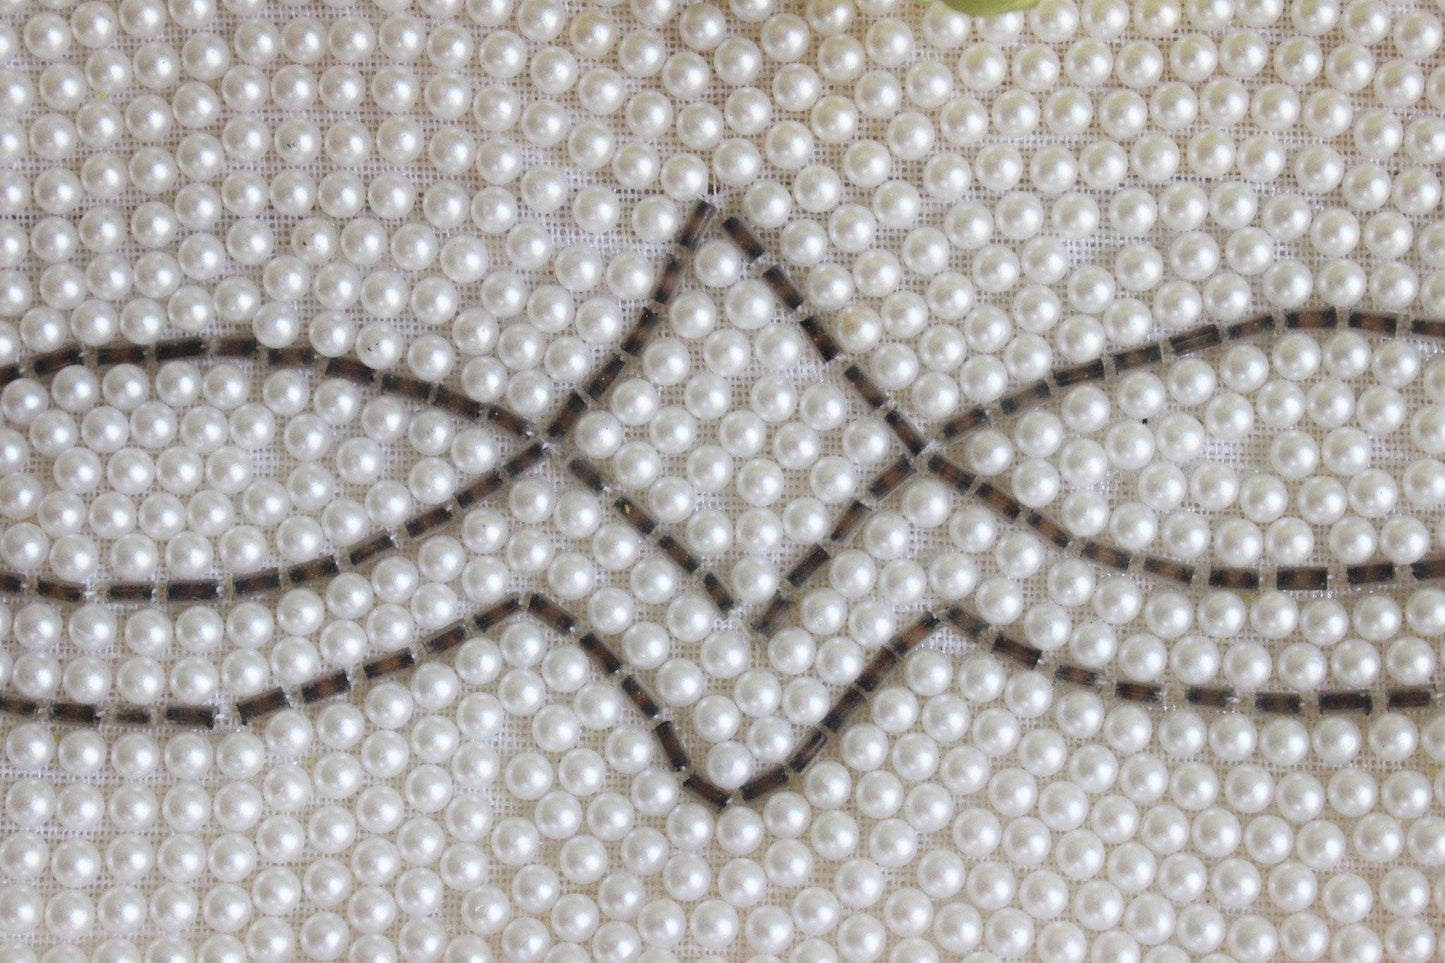 Vintage 1950s Faux Pearl Beaded Clutch Purse, Bags by Susan